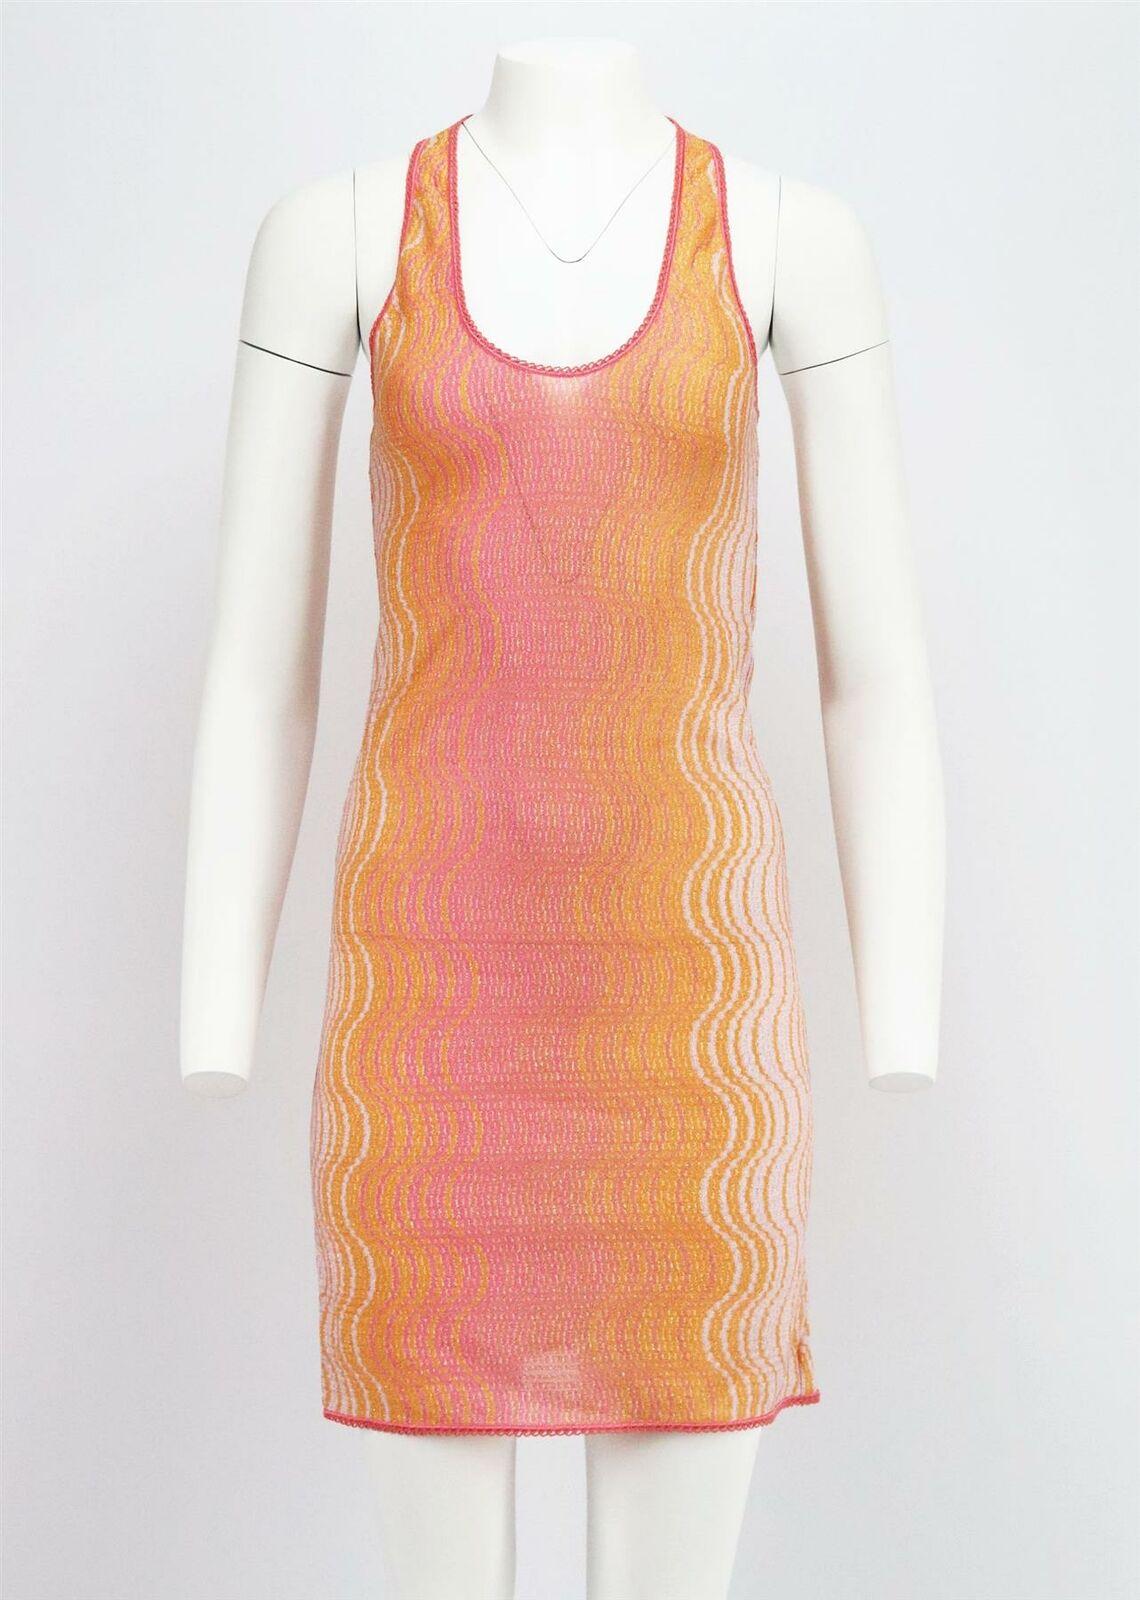 The distinctive patterns of Missoni Mare's crochet-knit pieces are universally recognizable, expertly spun in Italy, this mini dress has a figure-hugging silhouette that is slightly sheer.
Orange and pink crochet-knit.
Slips on. 50% Rayon, 32% rayon